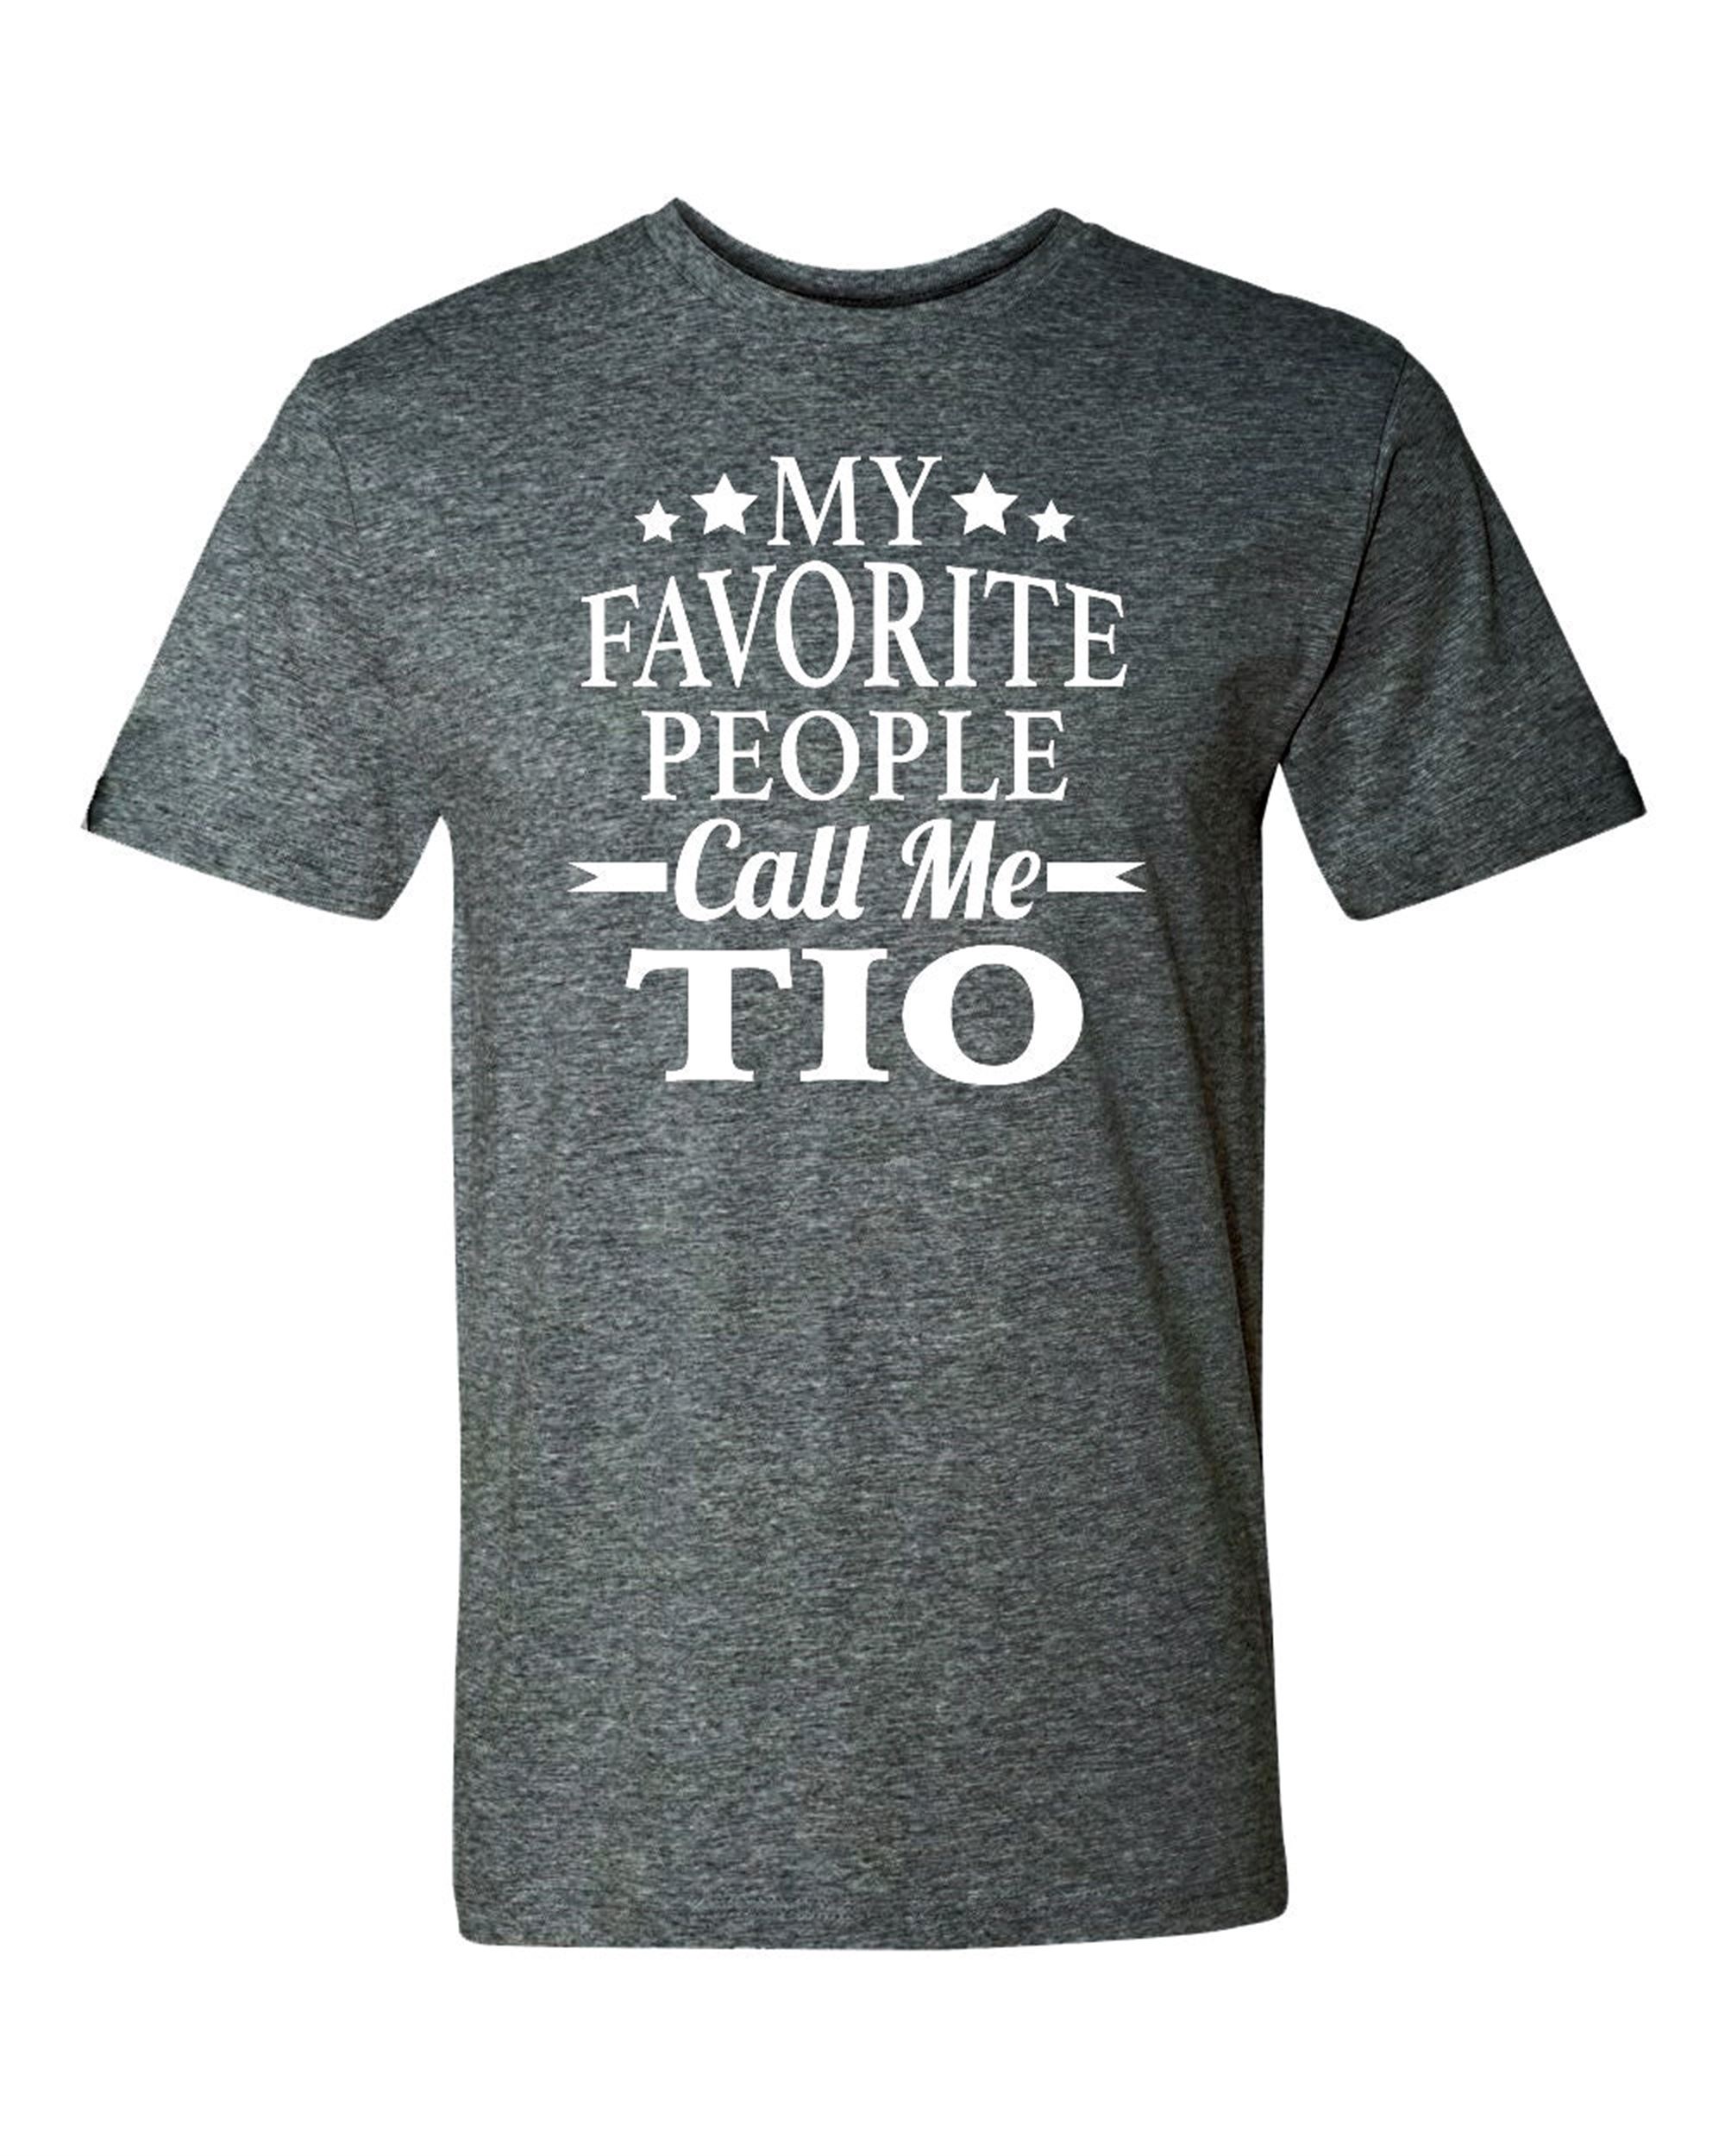 Special My Favorite People Call Me Tio - Unisex Shirt - Tio Shirt - Tio Gift - Father's Day Gift 